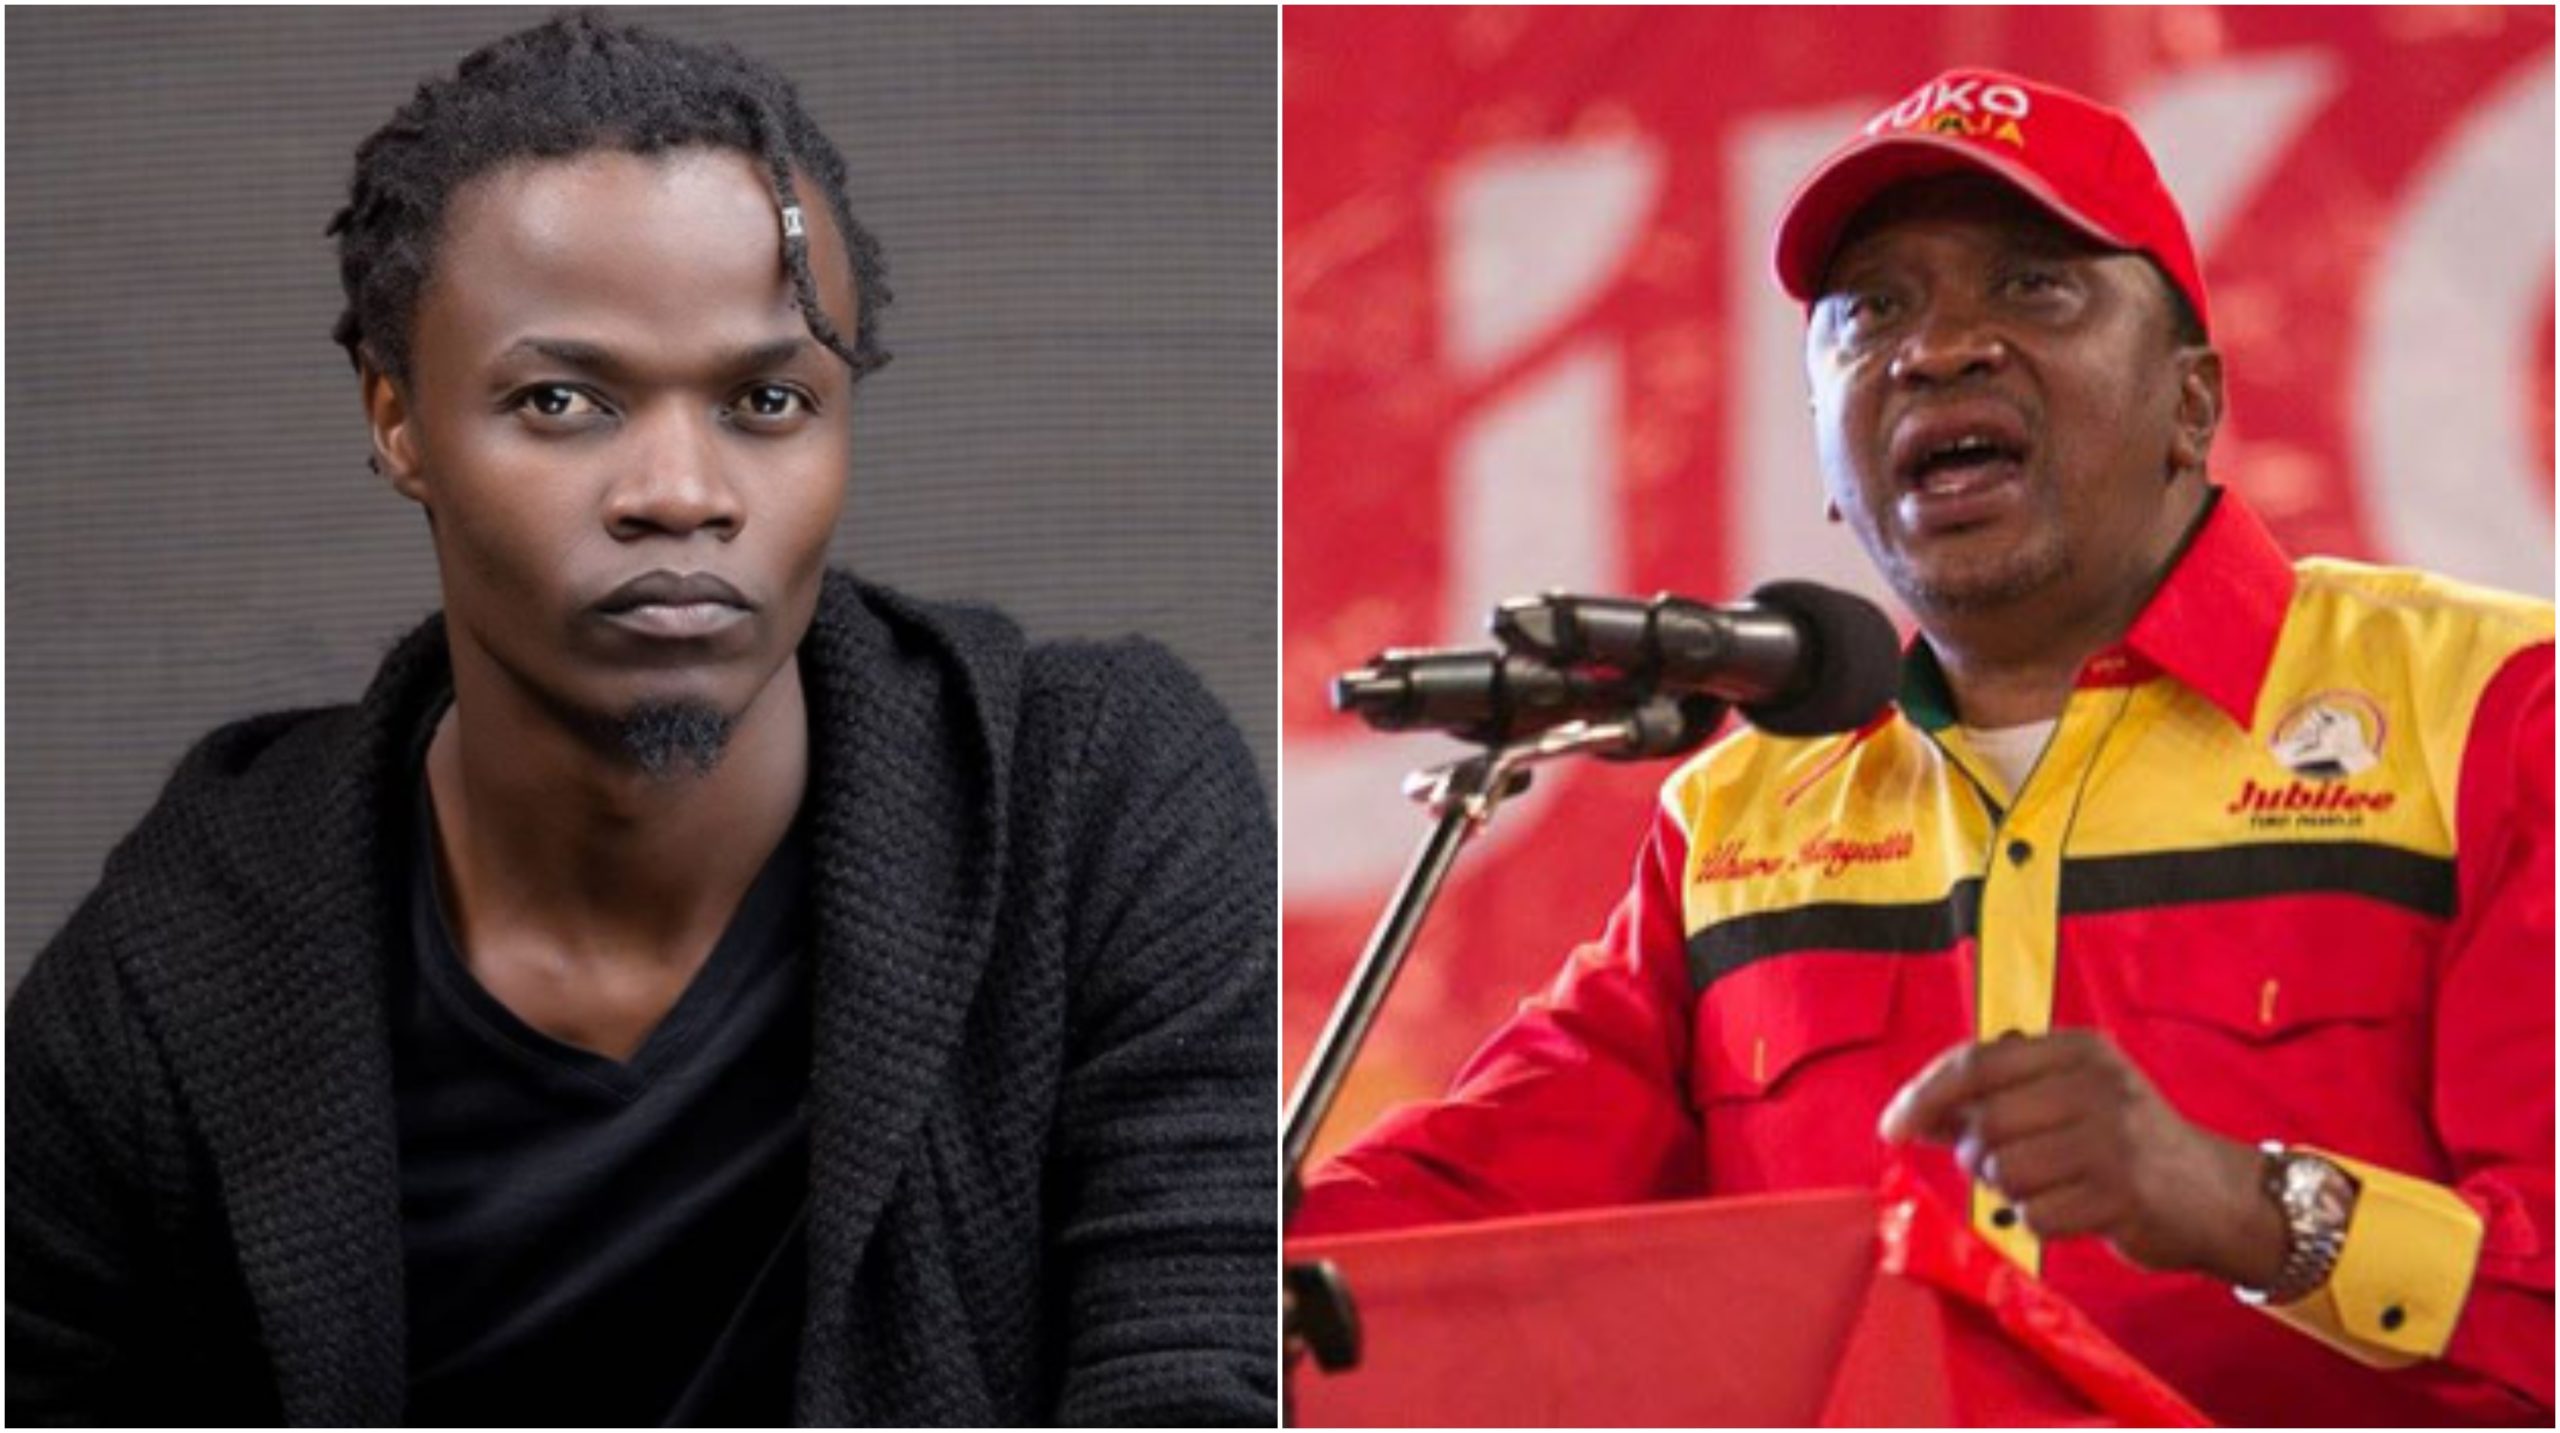 Juliani threatens to sue Jubilee Party over copyright infringement